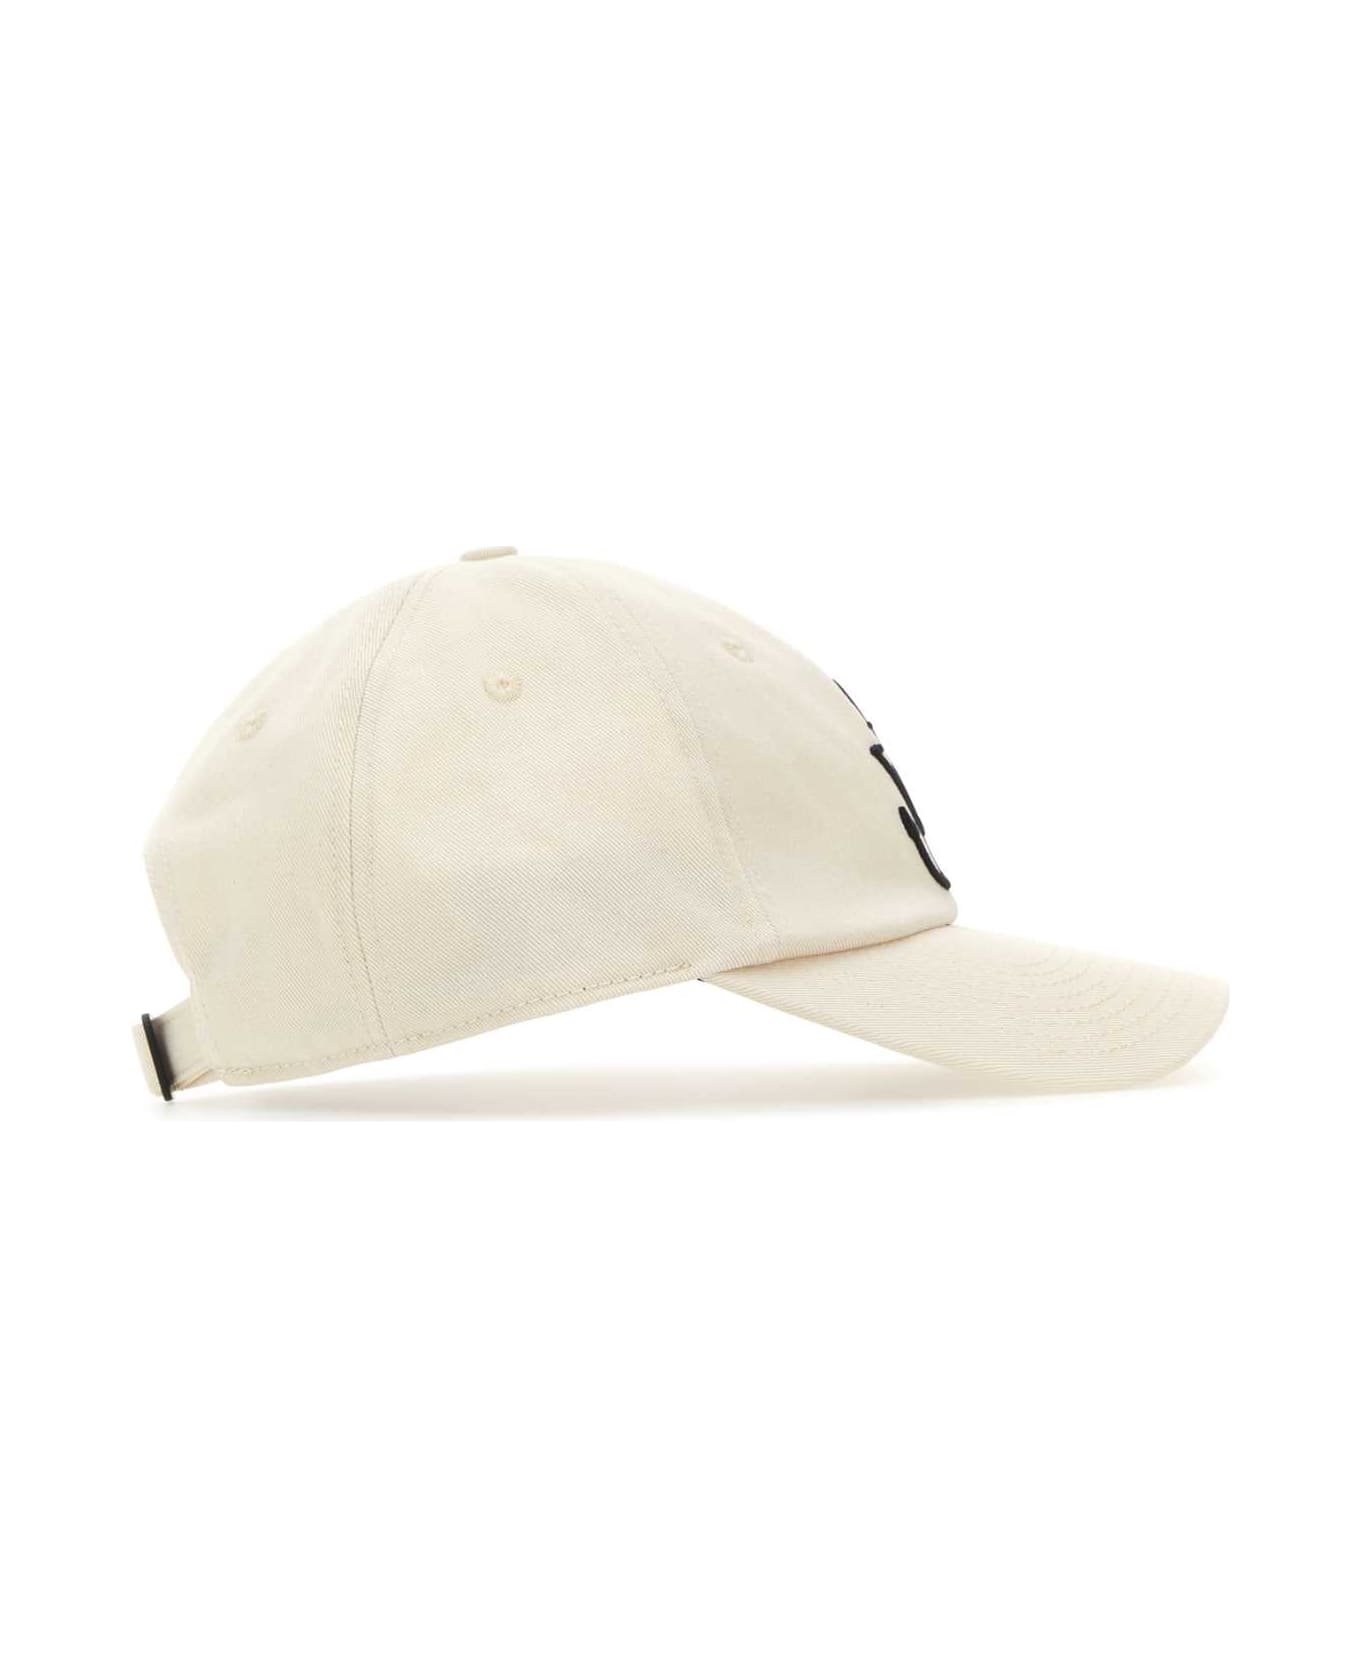 J.W. Anderson Ivory Cotton Baseball Hat - NATURAL